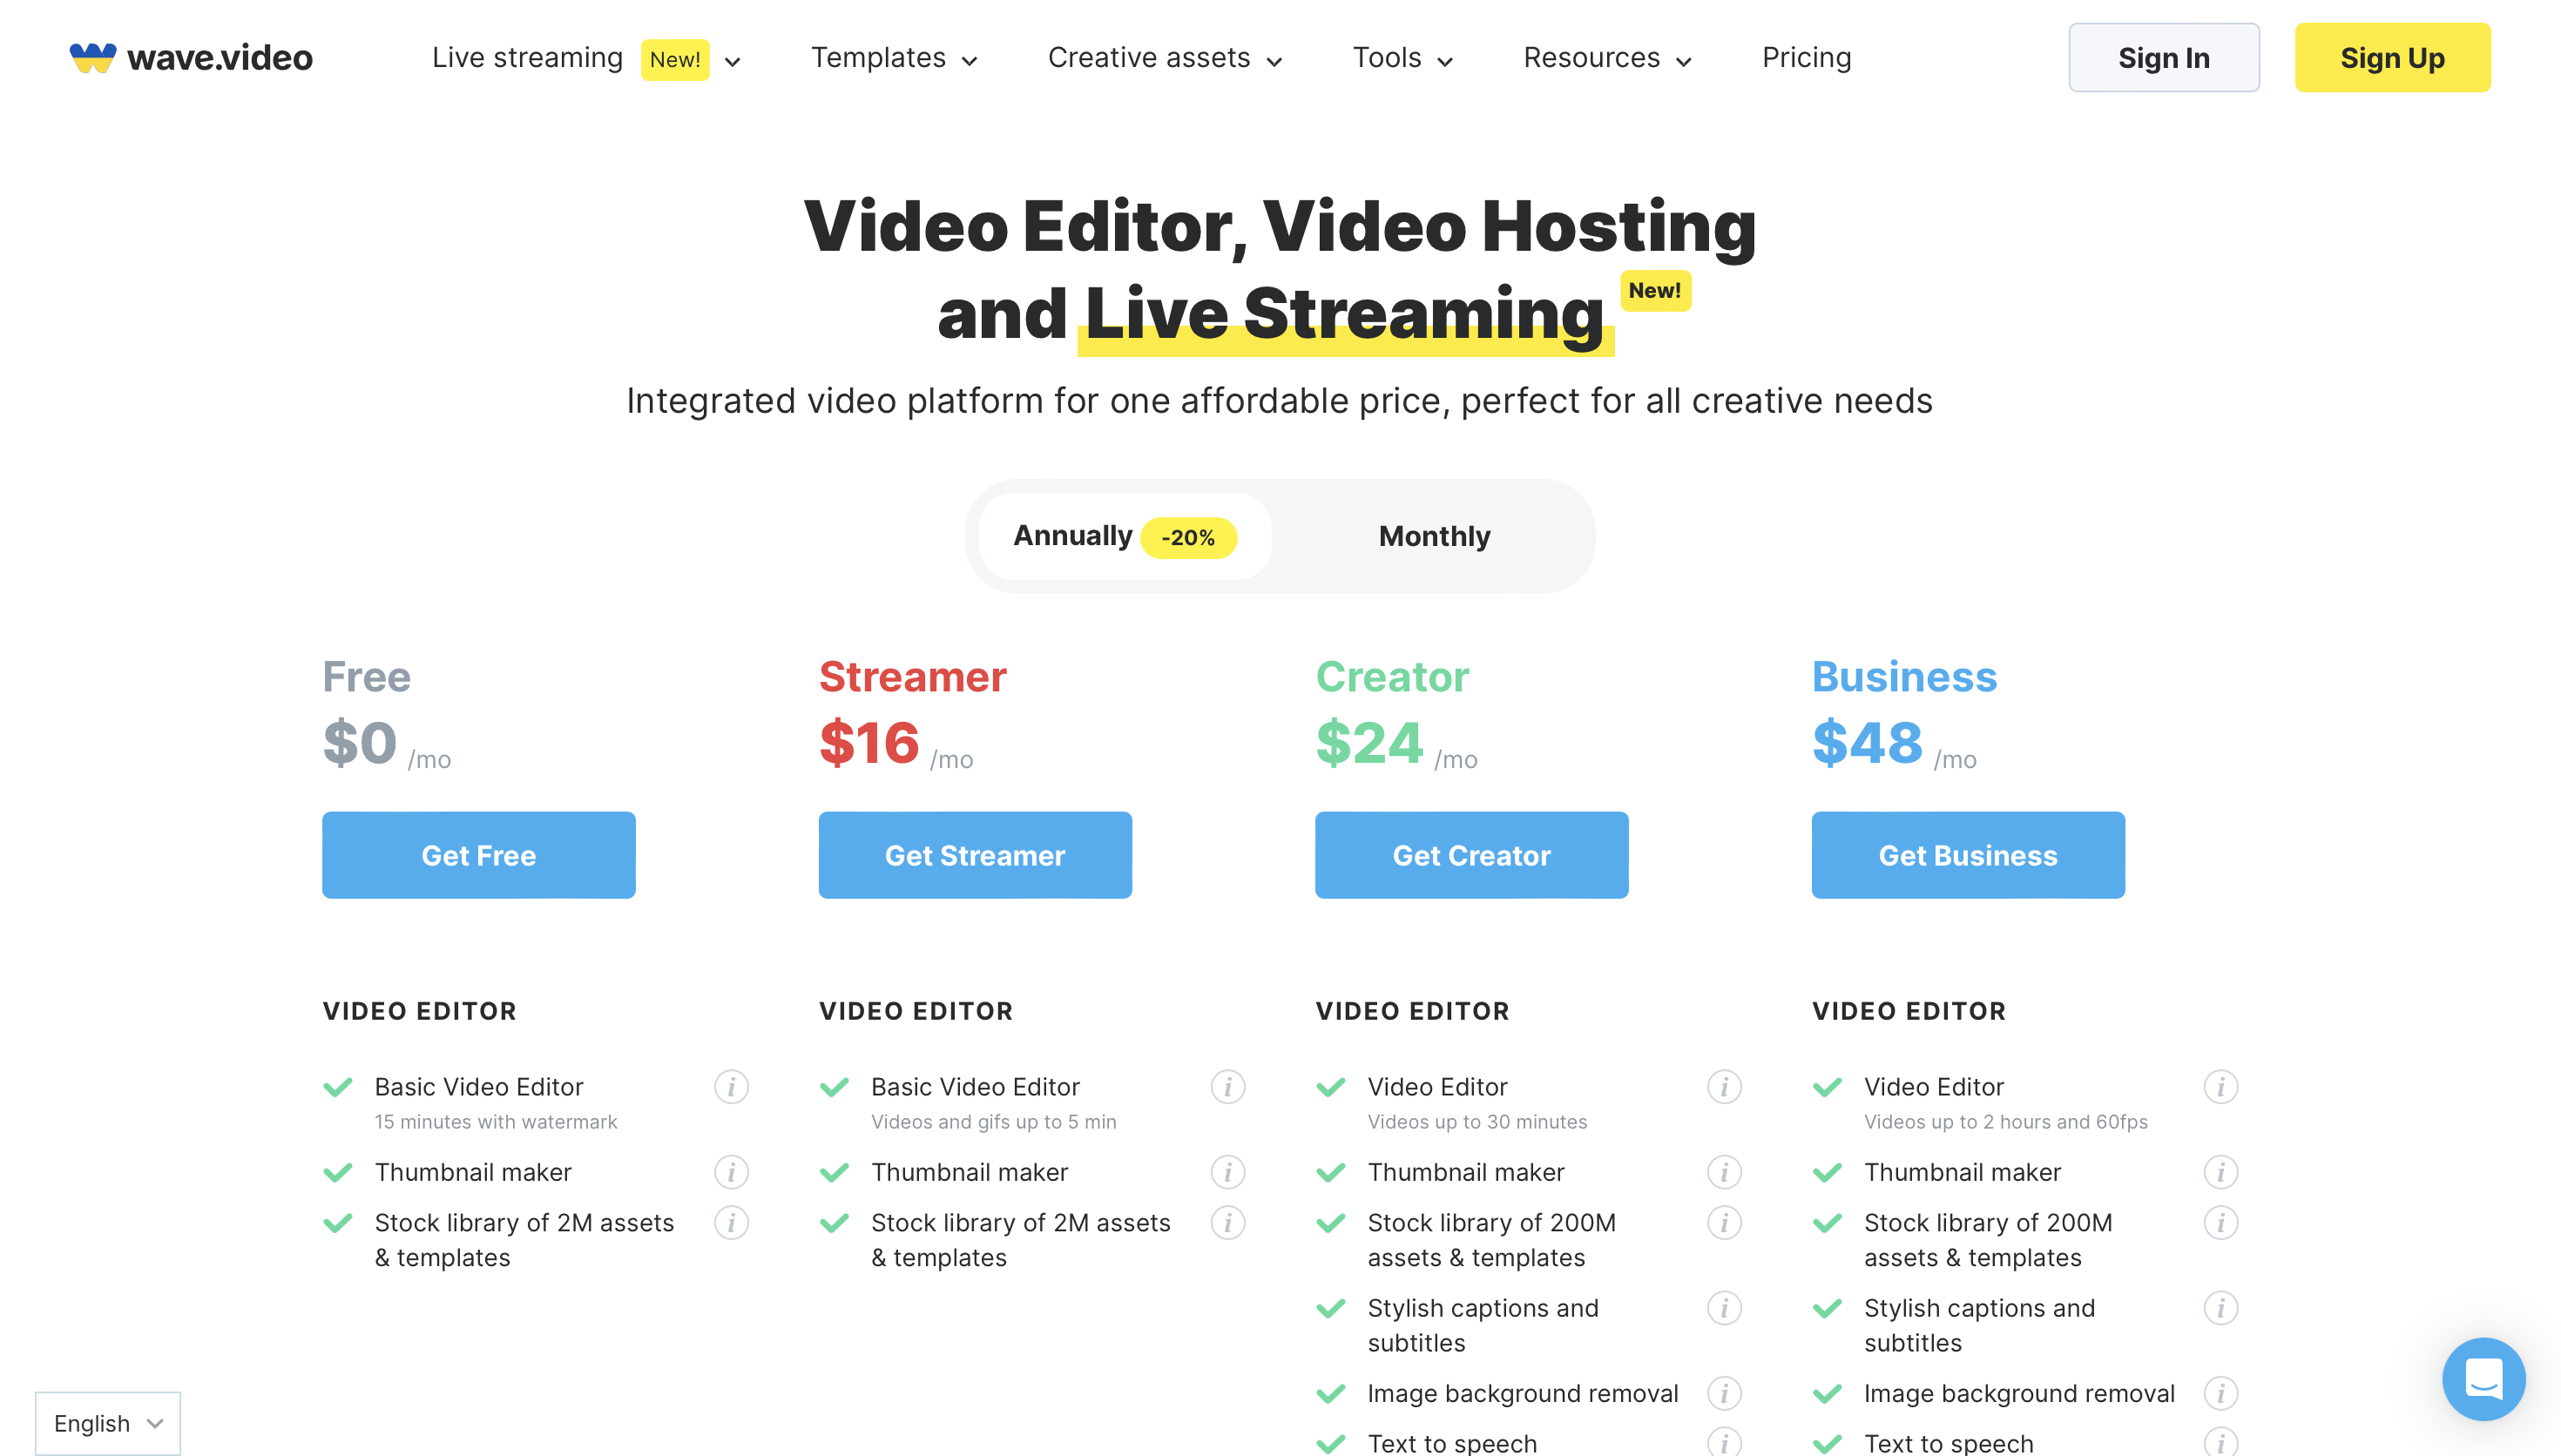 Wave Video Pricing